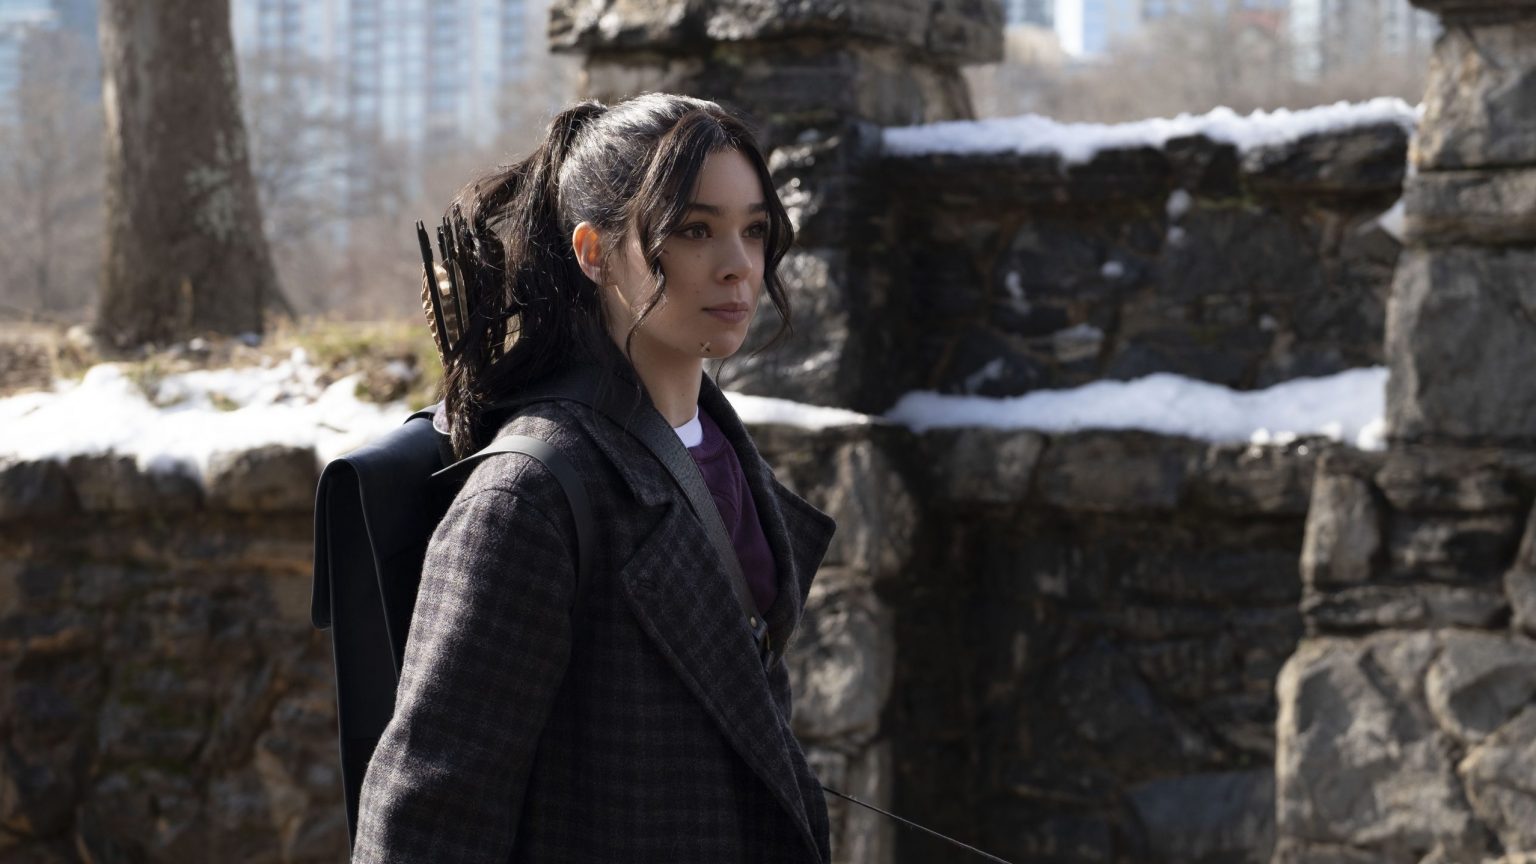 Hailee Steinfeld as Kate Bishop sporting a quiver full of arrows in a snowy New York park as seen in the new Marvel series on Disney+ HAWKEYE.